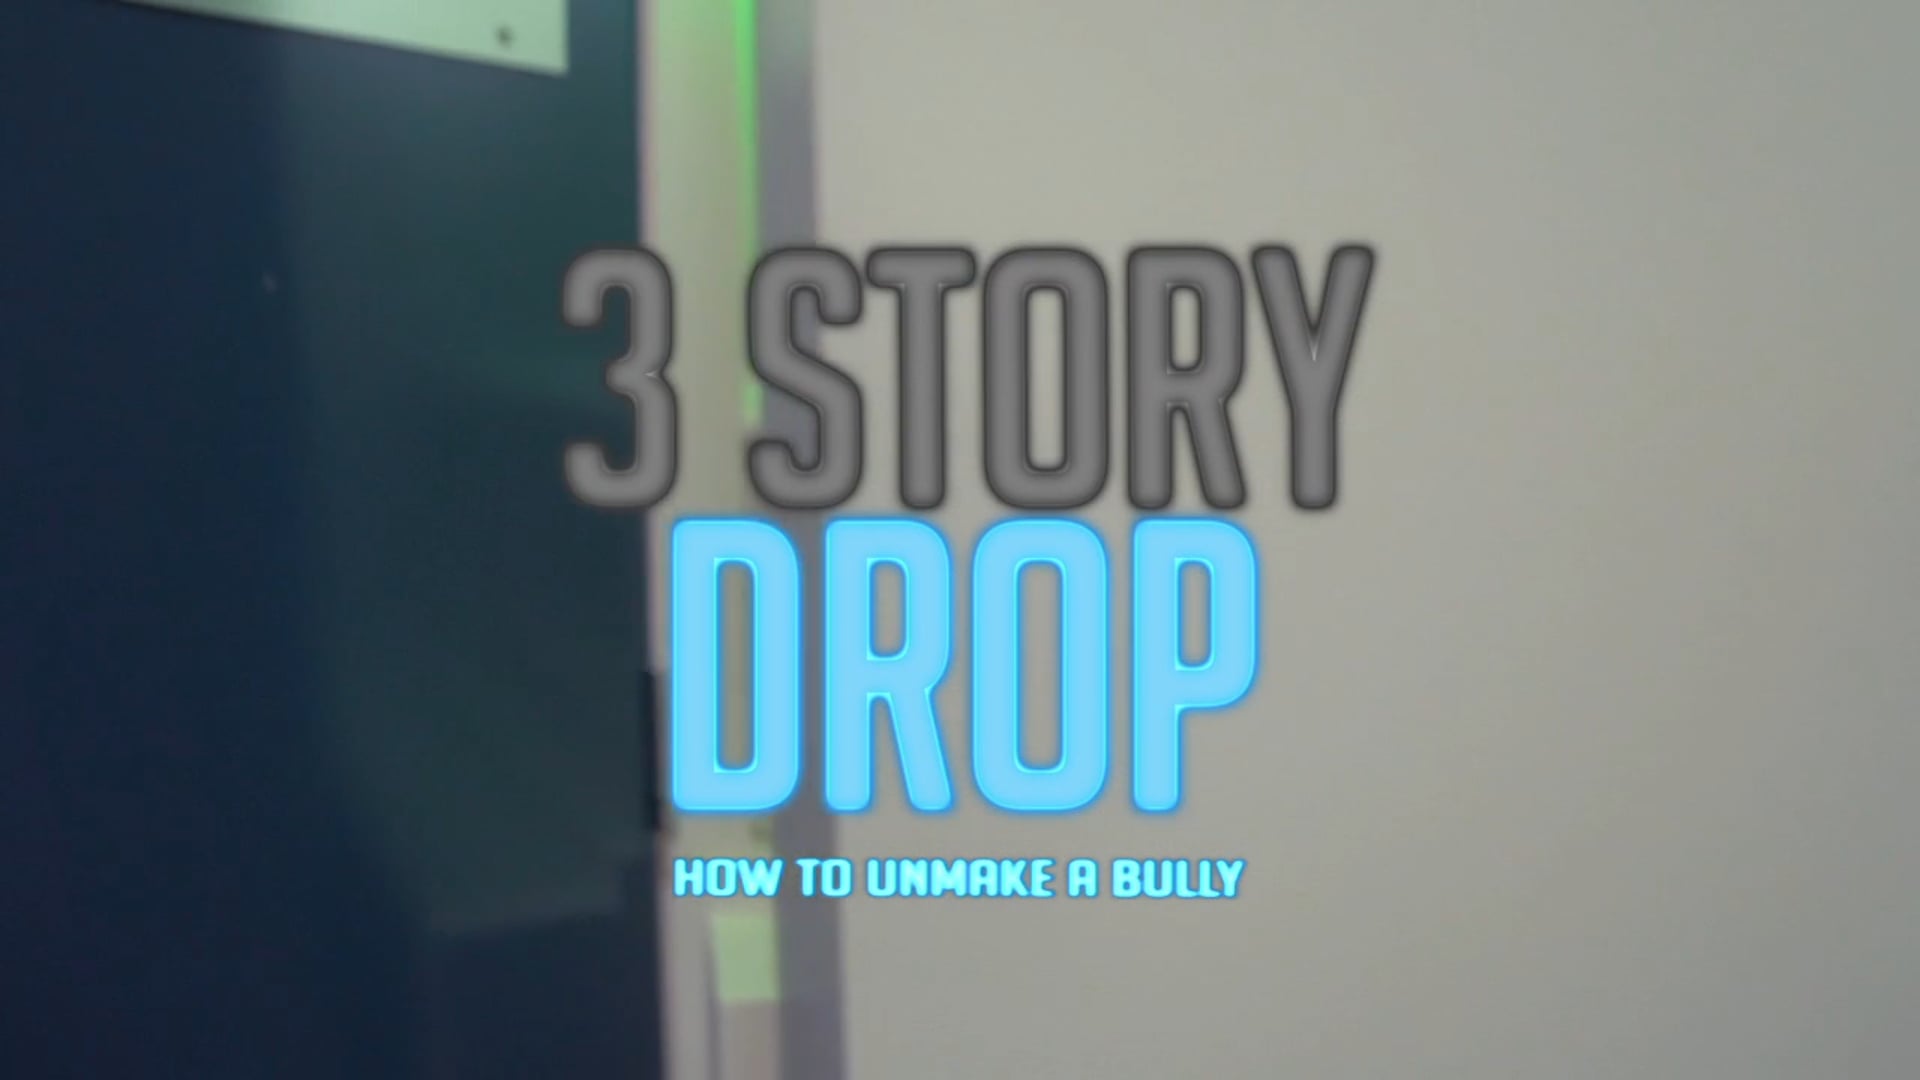 Watch How To UnMake a Bully: 3 Story Drop Part 2 on our Free Roku Channel